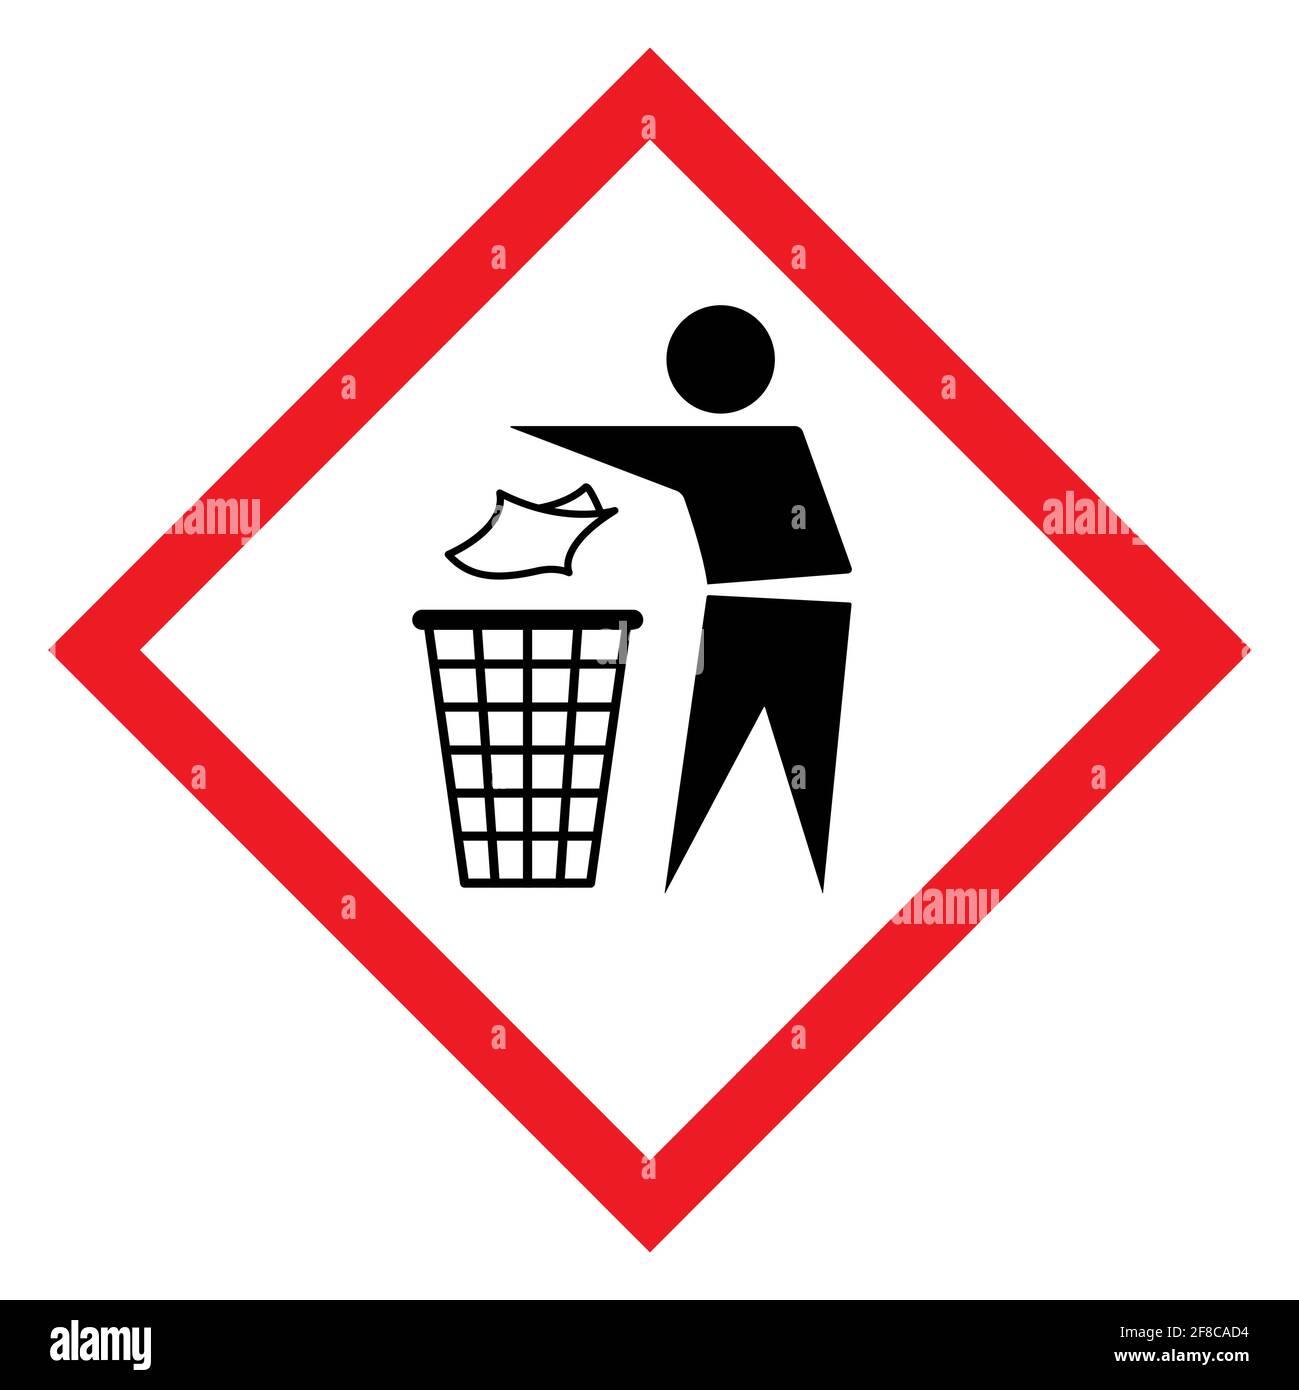 Do not litter flat icon in red rhombus isolated on white background. Keep it clean vector illustration. Tidy symbol . Stock Vector